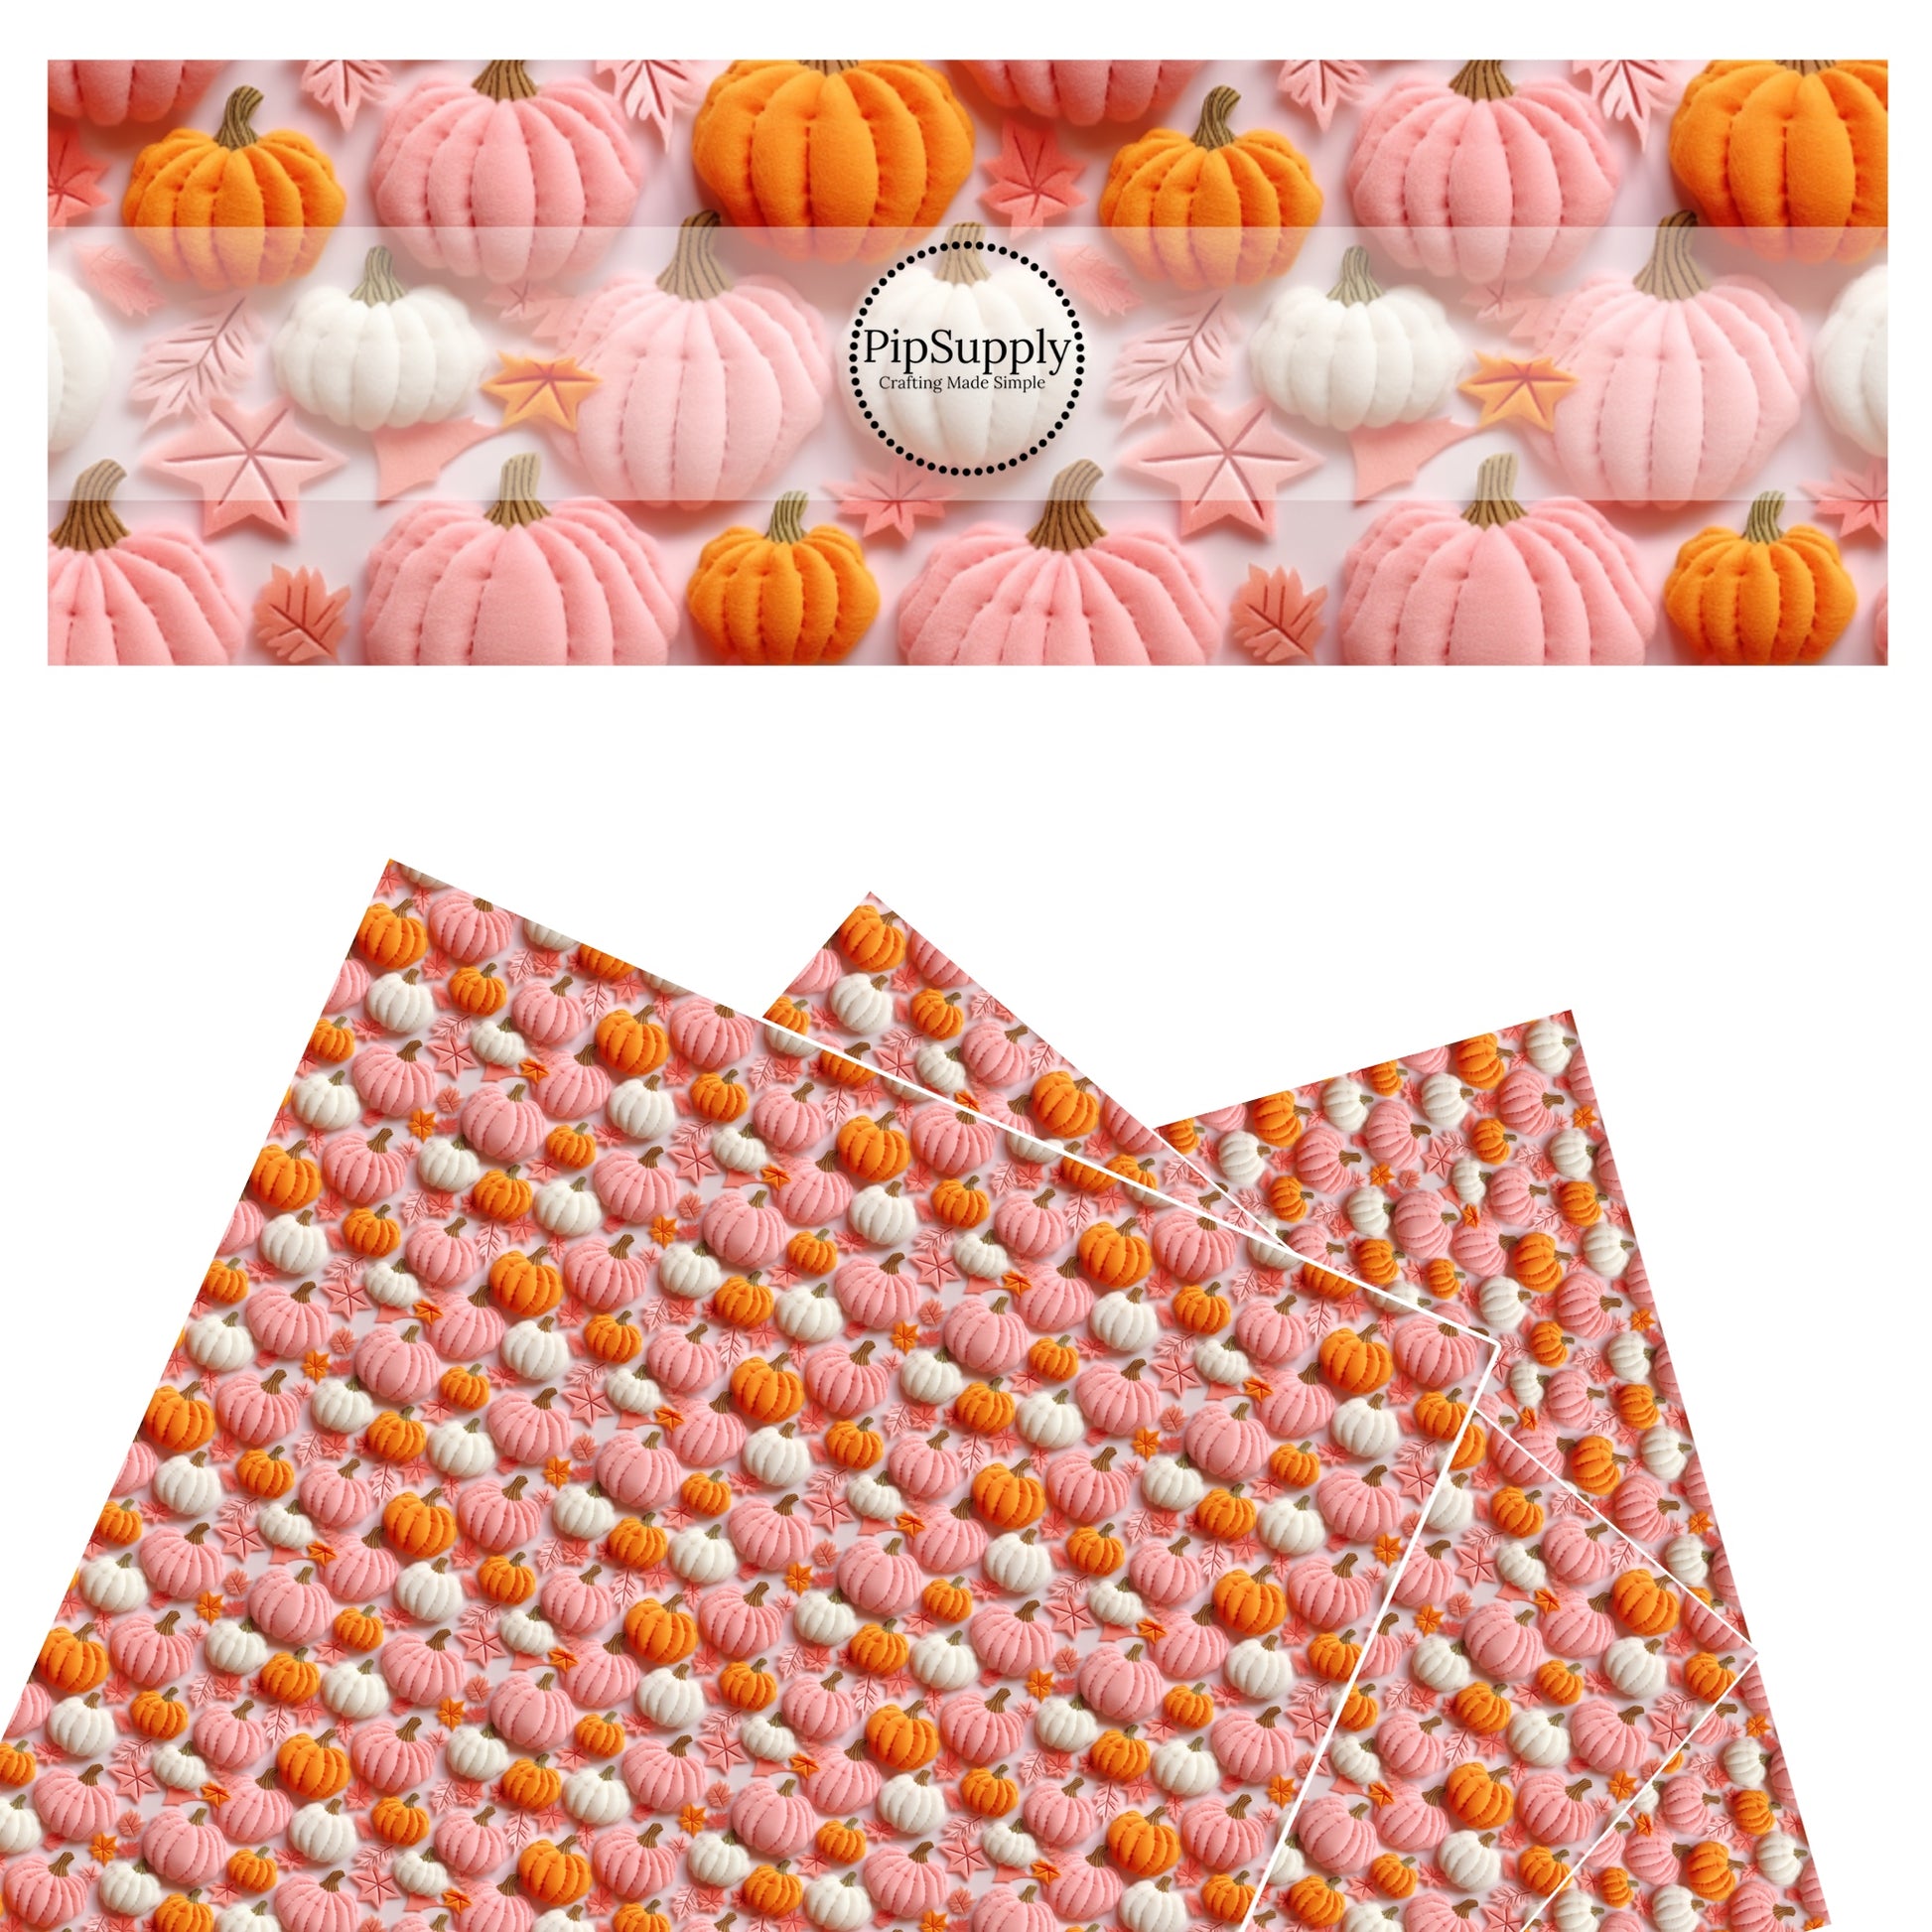 These holiday sewn pattern themed faux leather sheets contain the following design elements: orange, pink, and cream pumpkins and leaves on light pink. Our CPSIA compliant faux leather sheets or rolls can be used for all types of crafting projects.